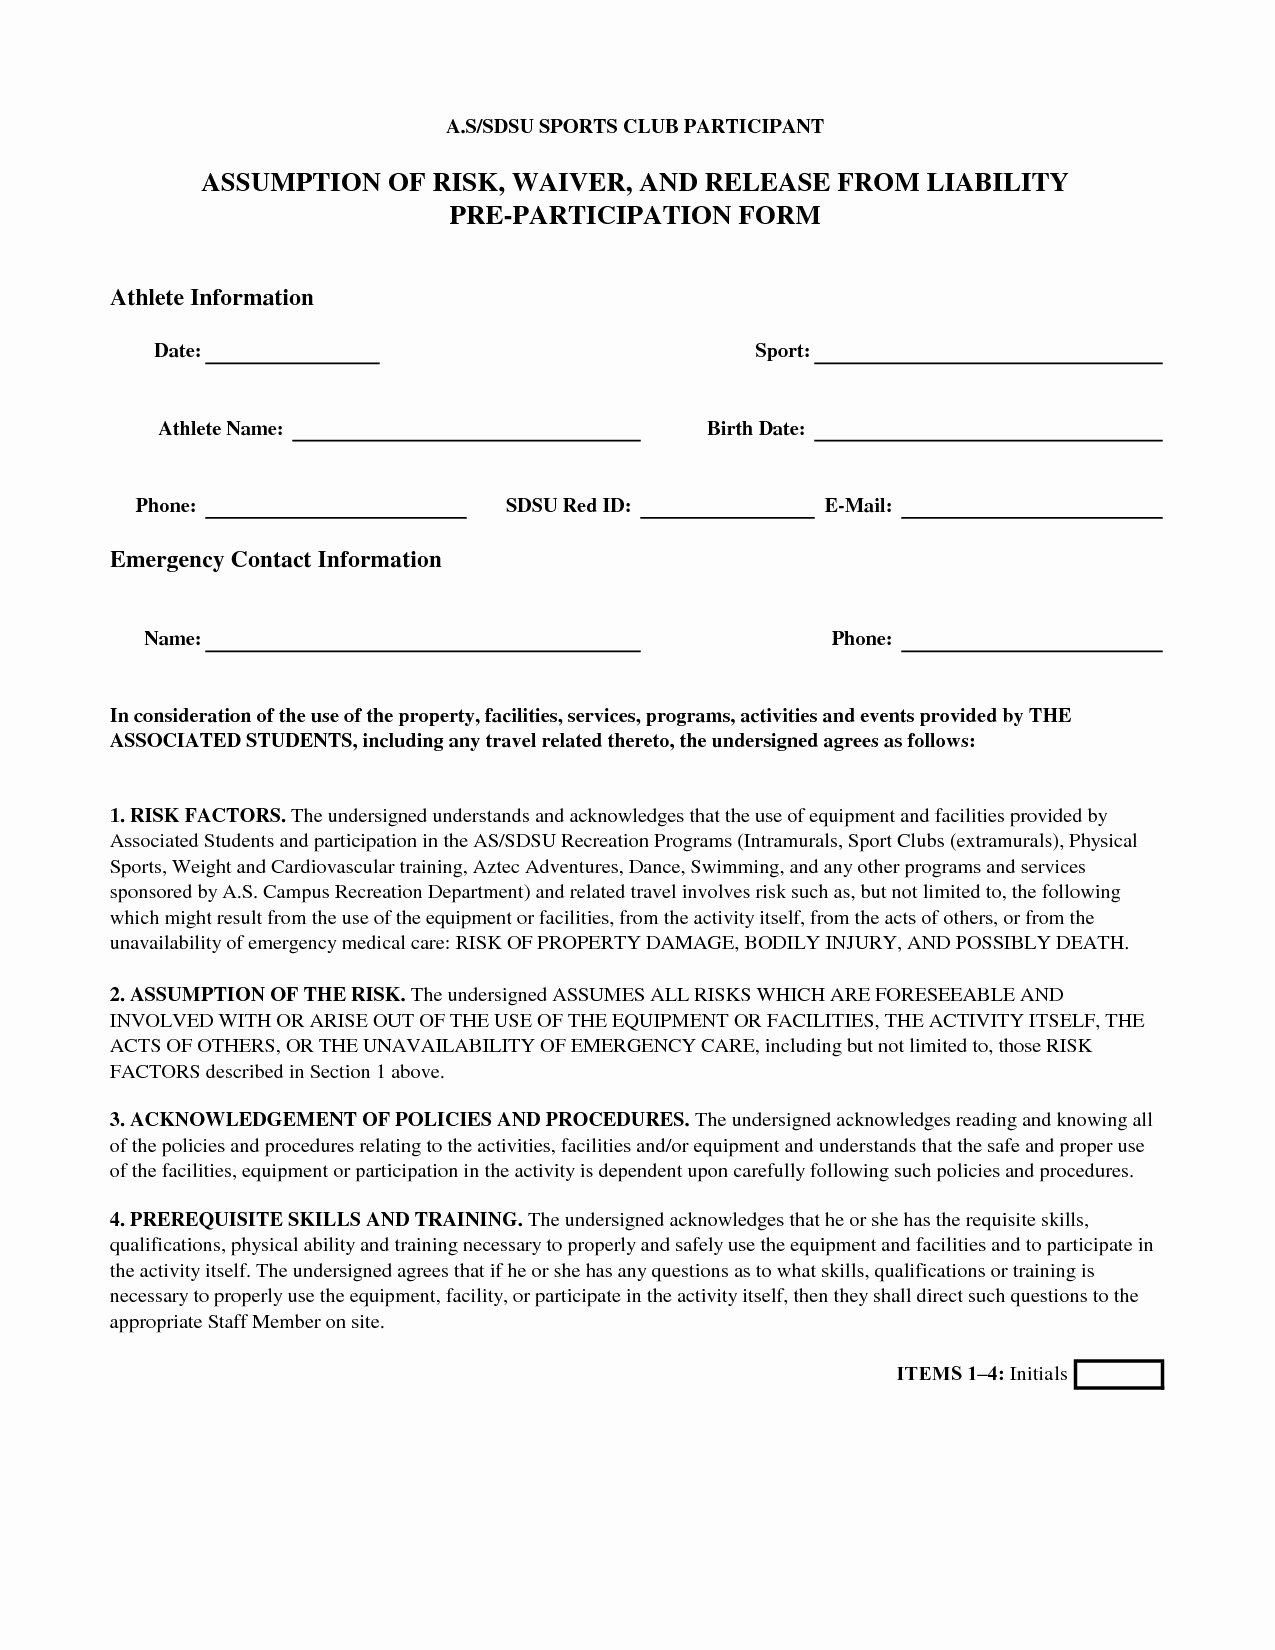 Generic Liability Waiver and Release form